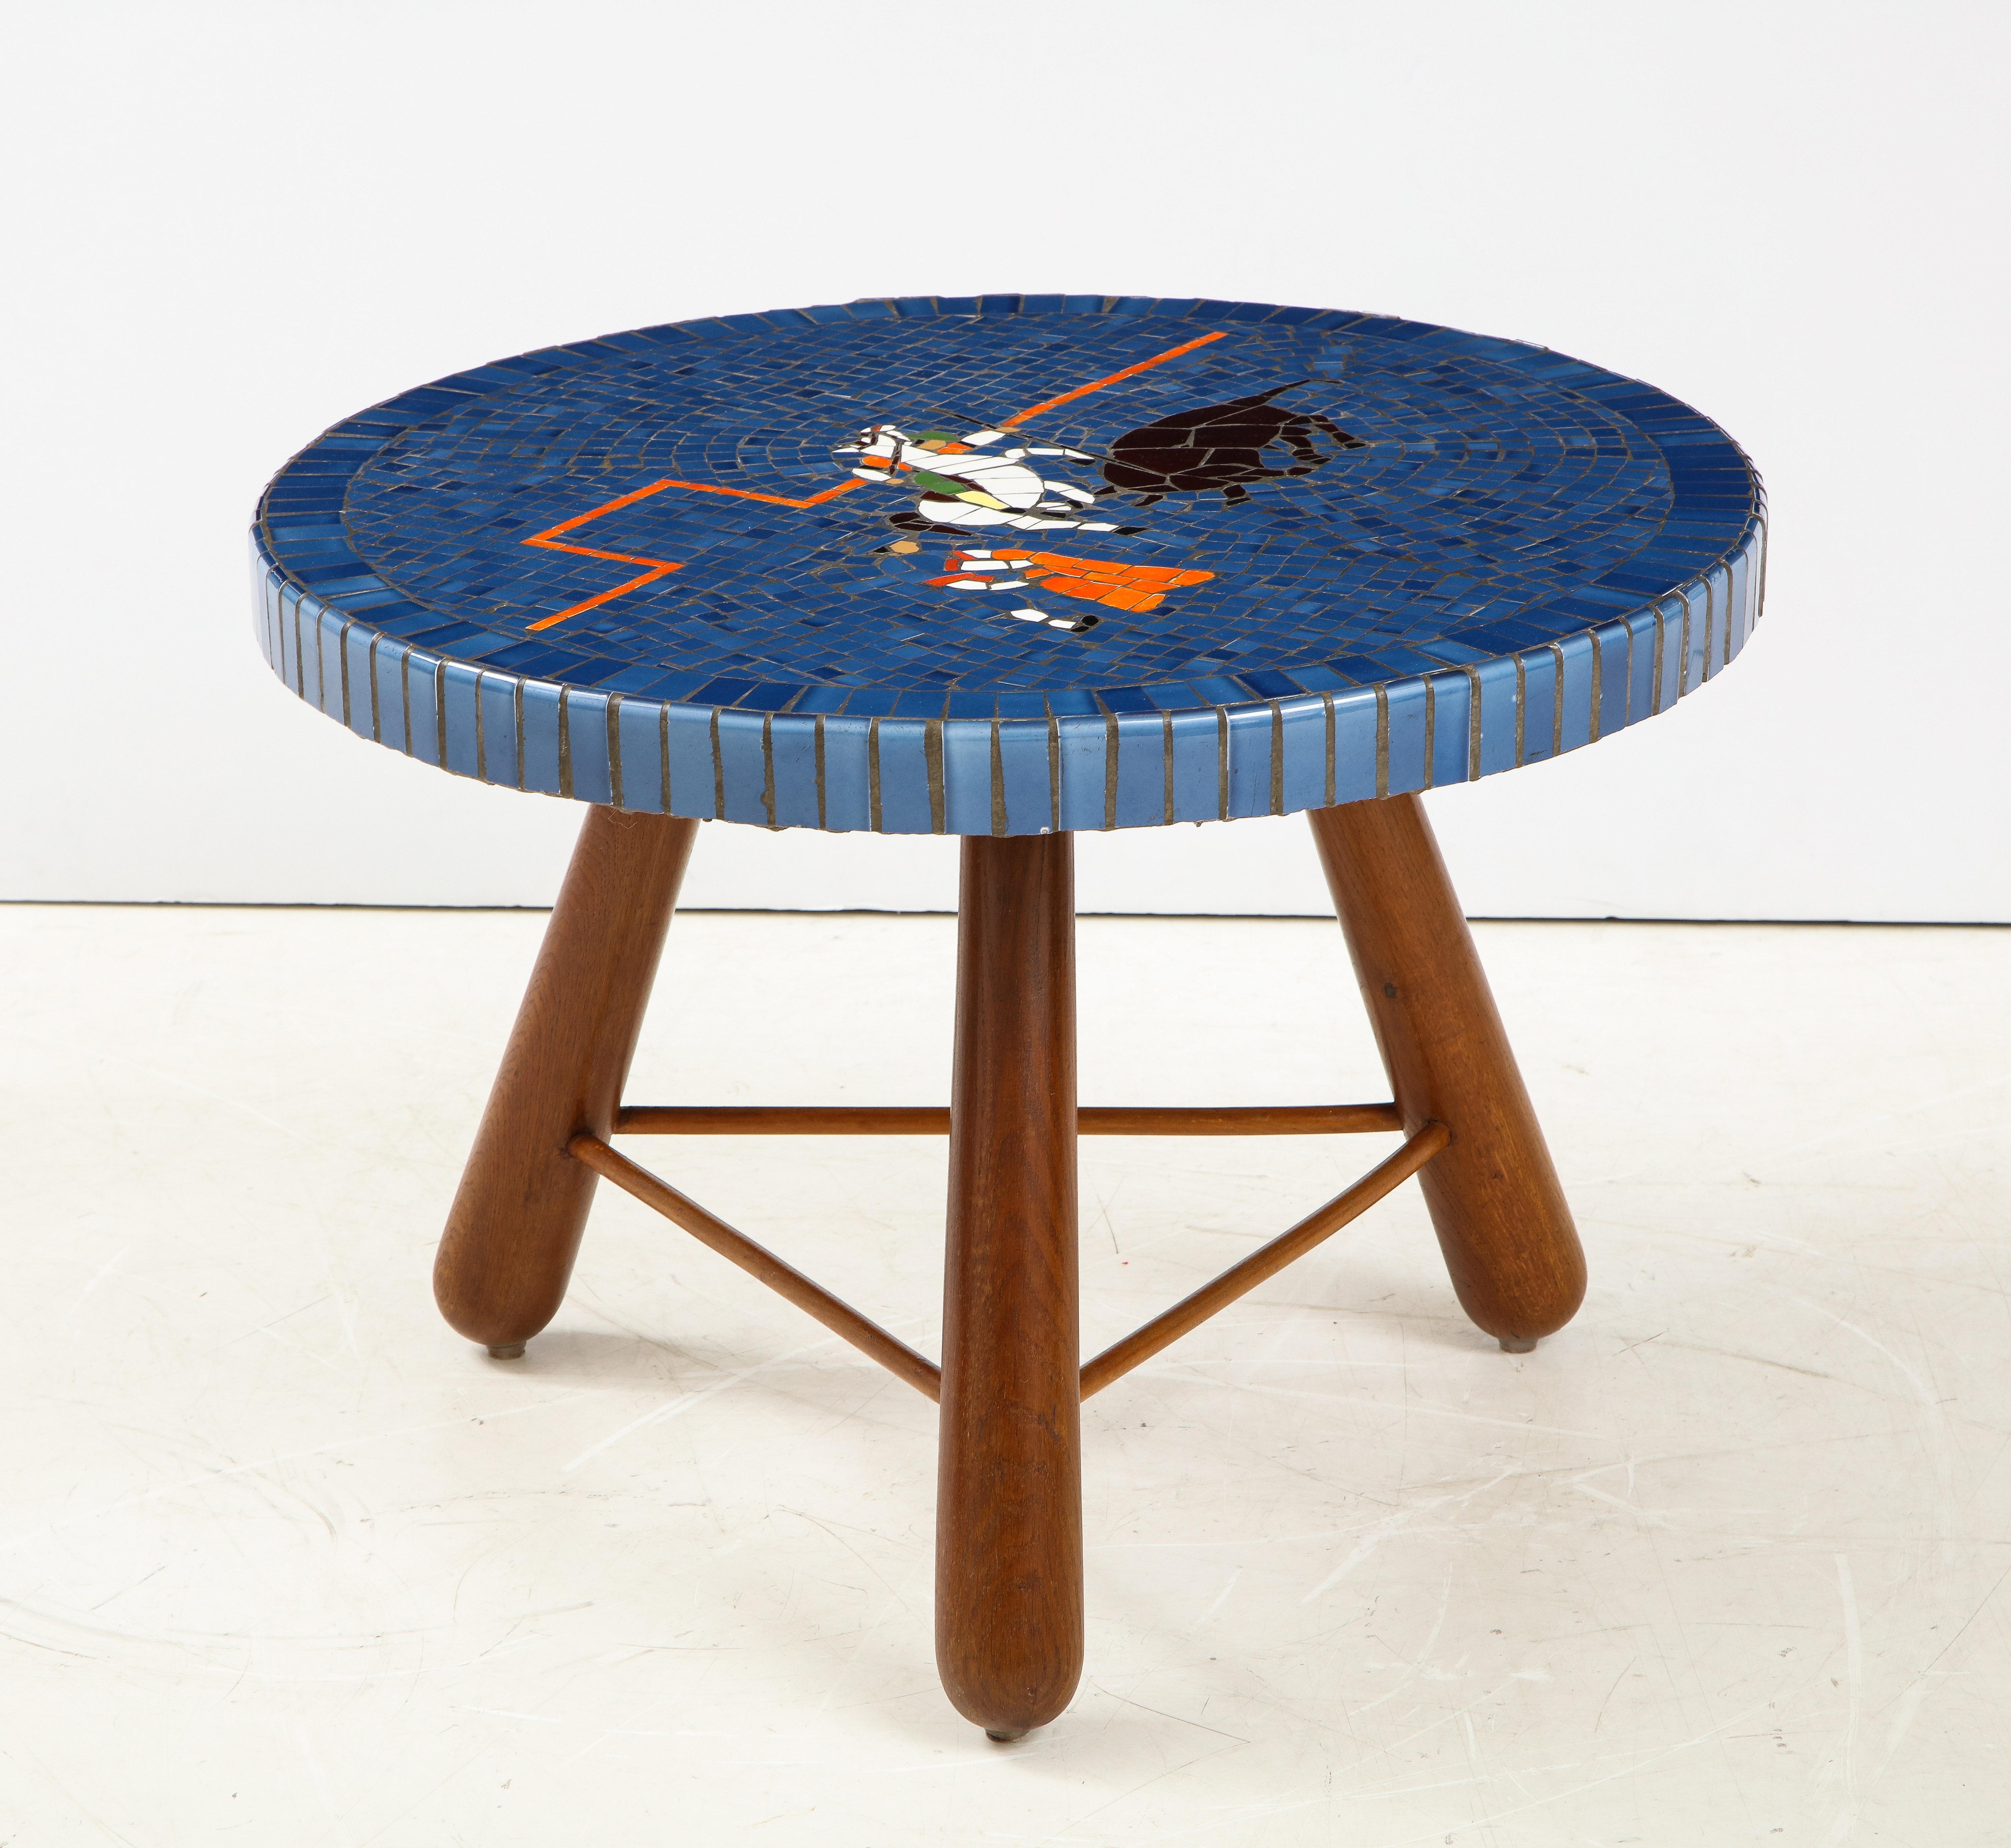 A Danish tile top and oak table, Circa 1940-50, attributed to cabinetmaker  Otto Færge and the top attributed to artist Paul Hedegård,  the circular top constructed with a concrete base set with colorful tile depicting a bull-fighting scene, raised